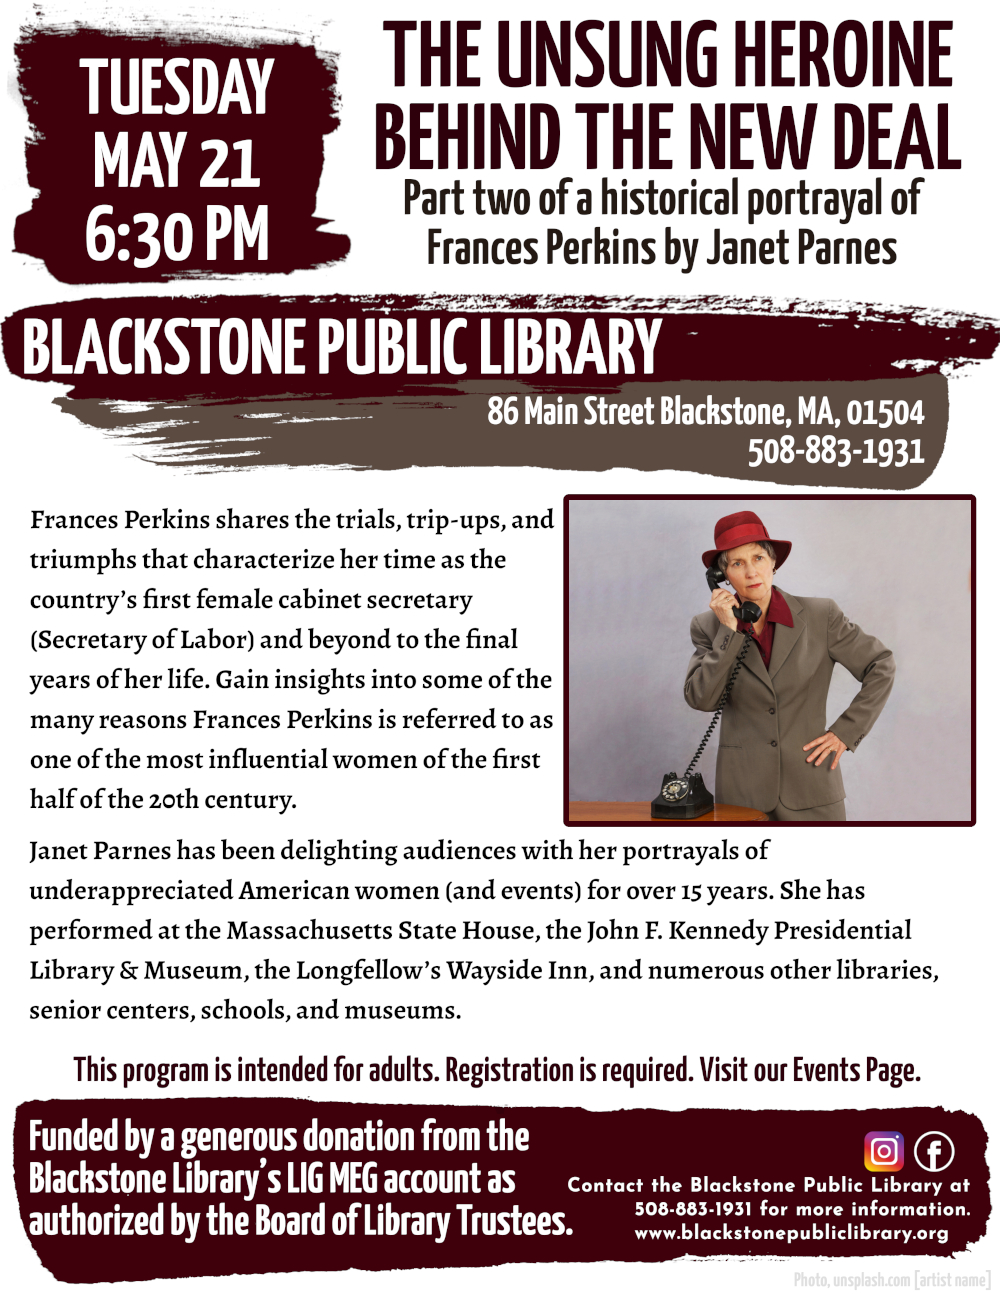 The Unsung Heroine Behind the New Deal: Part two of a historical portrayal of Frances Perkins by Janet Parnes. Tuesday, May 21, at 6:30 PM.  Flyer features a photograph of Janet Parnes dressed in costume as Frances Perkins. She sands with one hand on her hip, and the other holding the earpiece of a rotary telephone to her ear.  Frances Perkins shares the trials, trip-ups, and triumphs that characterize her time as the country’s first female cabinet secretary (Secretary of Labor) and beyond to the final years of her life. Gain insights into some of the many reasons Frances Perkins is referred to as one of the most influential women of the first half of the 20th century.  Janet Parnes has been delighting audiences with her portrayals of underappreciated American women (and events) for over 15 years. She has performed at the Massachusetts State House, the John F. Kennedy Presidential Library & Museum, the Longfellow’s Wayside Inn, and numerous other libraries, senior centers, schools, and museums.  This program is intended for adults. Registration is required. Visit our Events Page.  Contact the Blackstone Public Library at 508-883-1931 for more information.  Funded by a generous donation from the Blackstone Library’s LIG MEG account as authorized by the Board of Library Trustees.